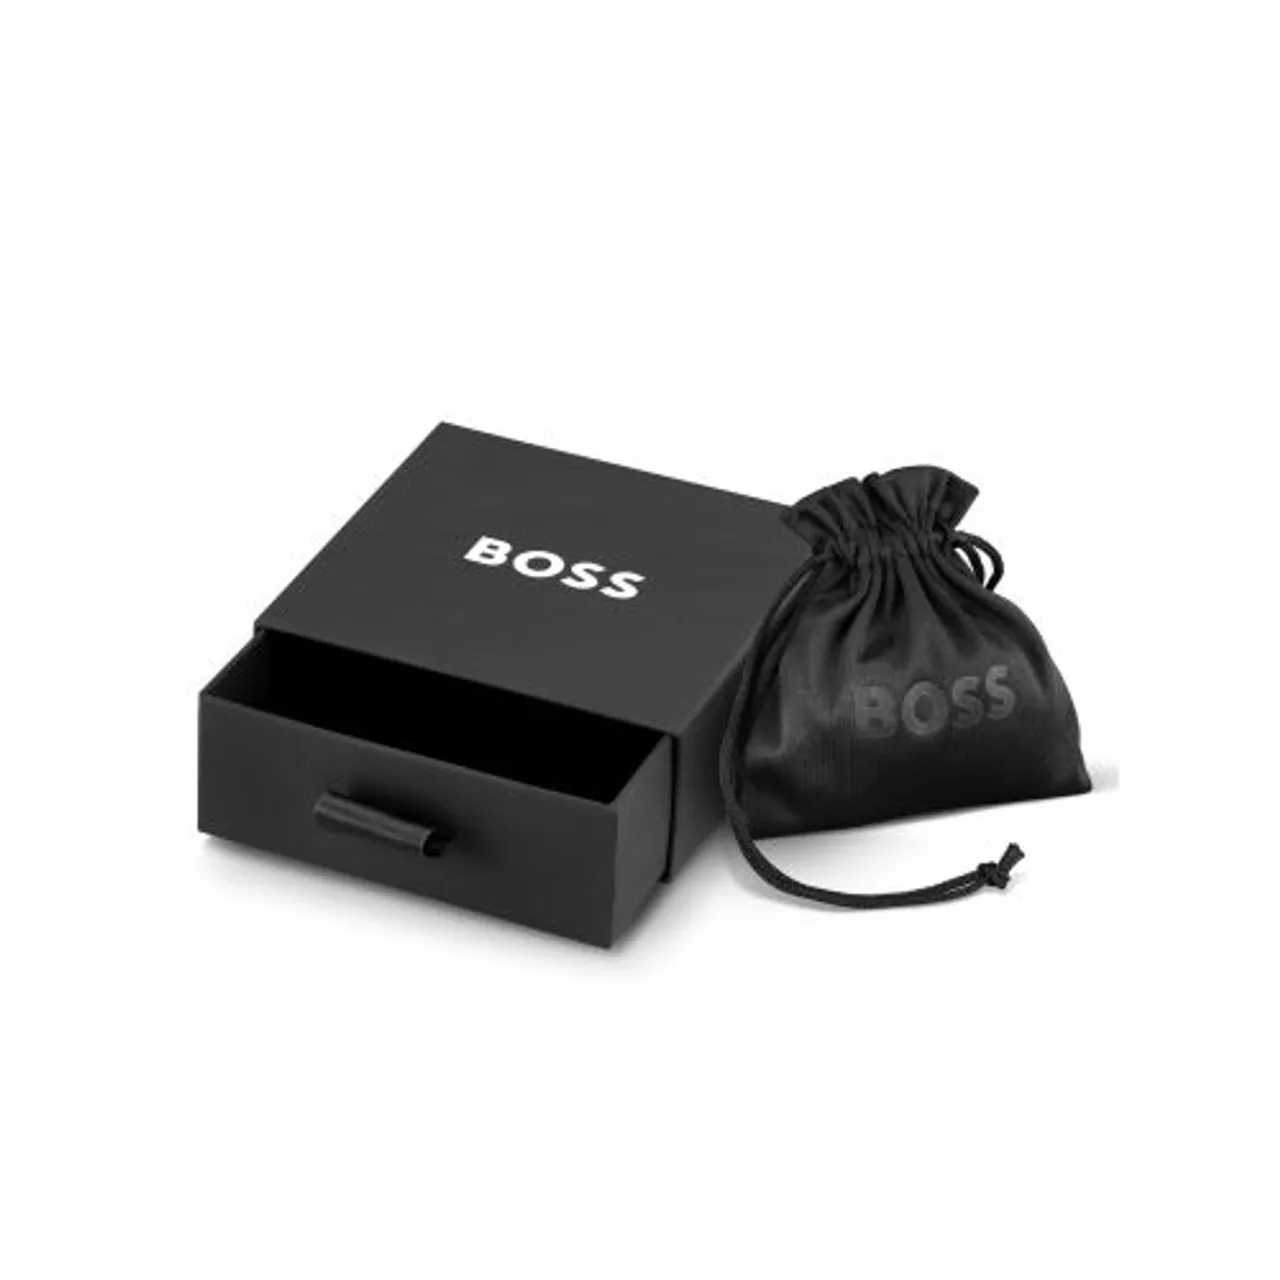 BOSS Mens Steel North Necklace